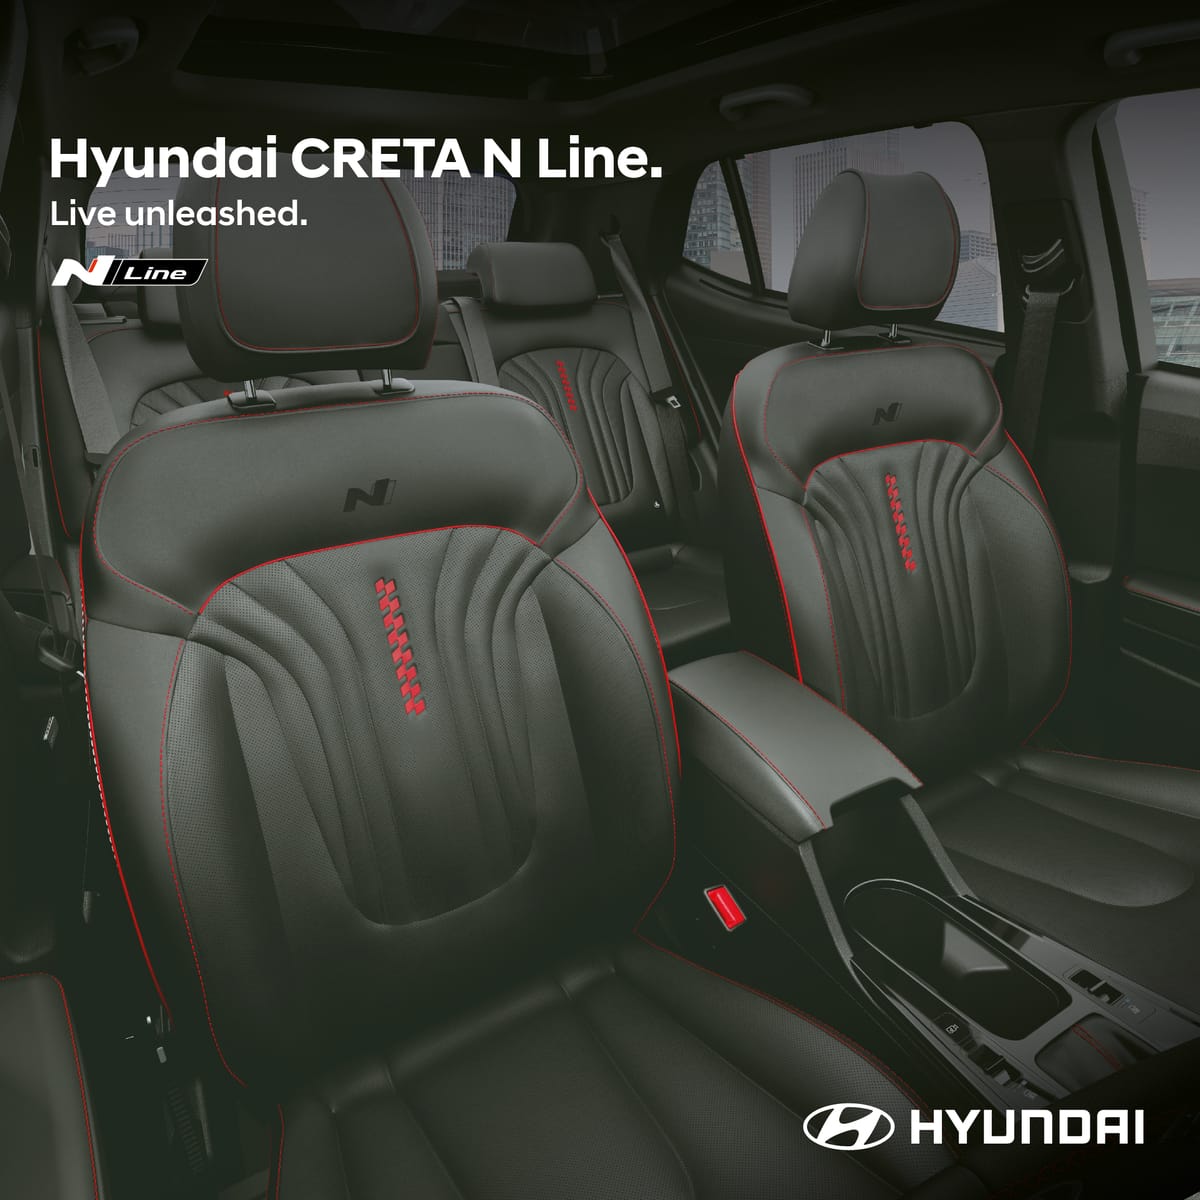 Hyundai CRETA N Line: Technology meets Innovation for an elevated experience